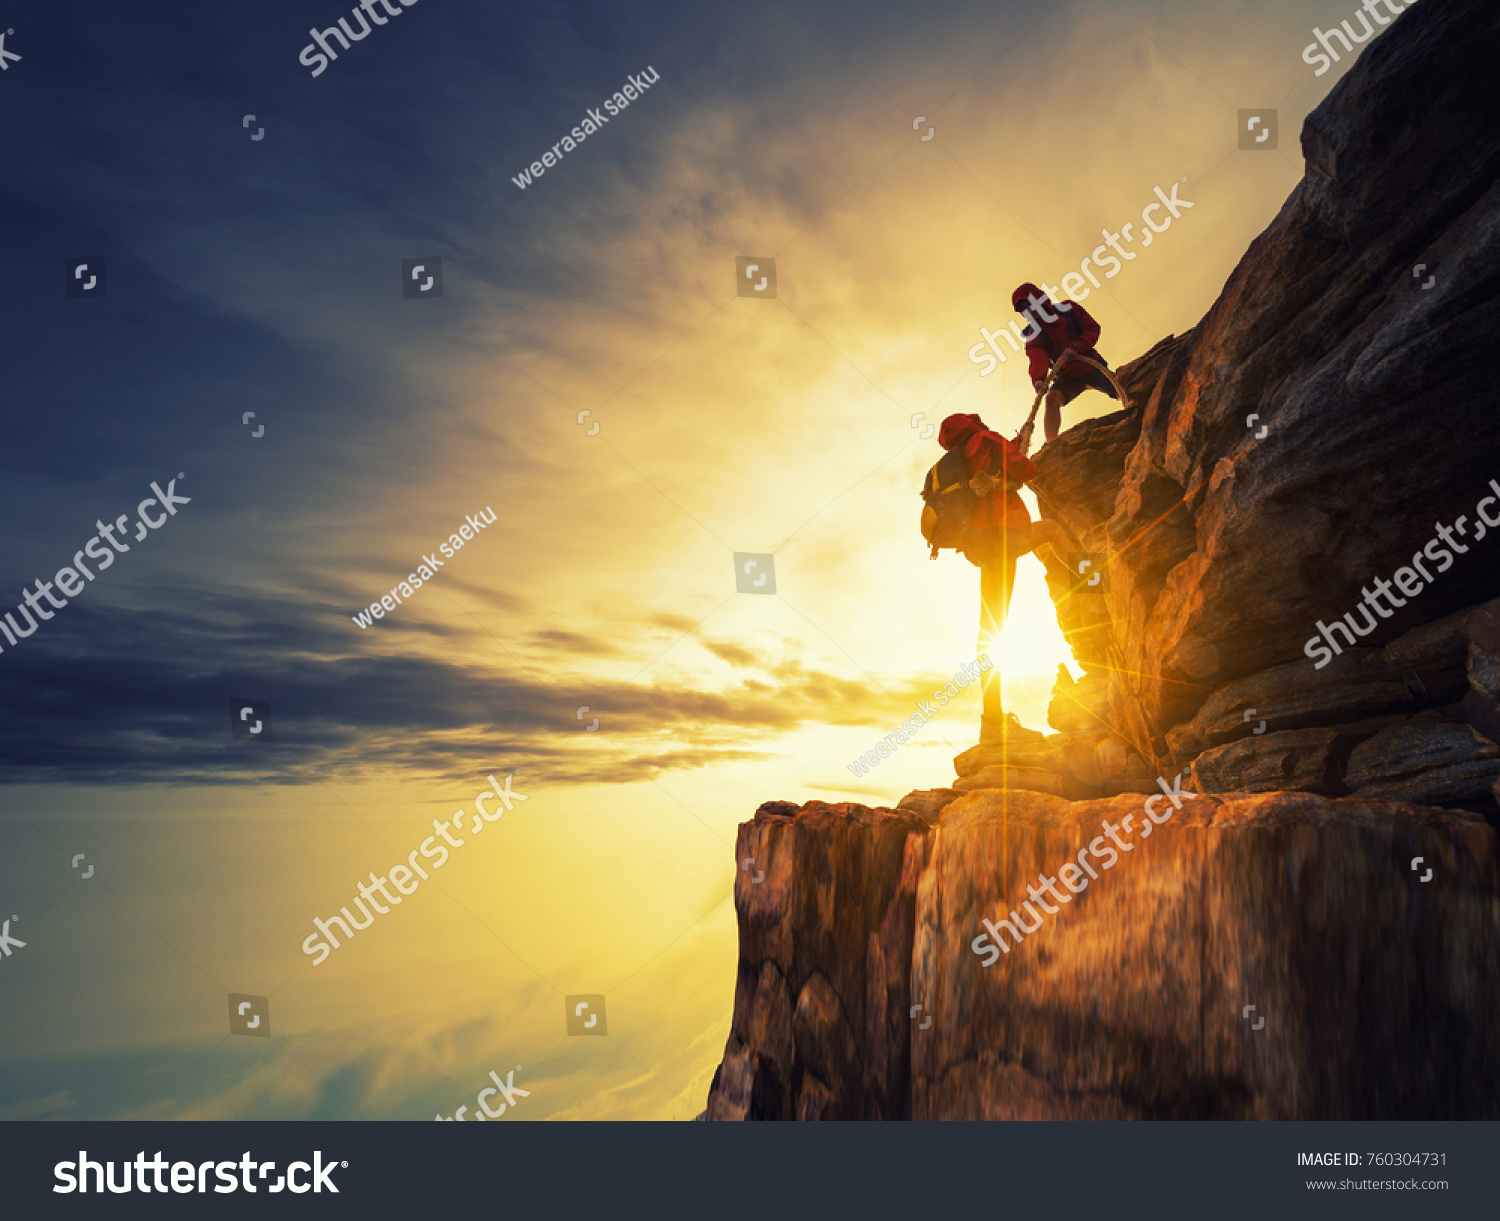 Asia couple hiking help each other silhouette in mountains with sunlight. #760304731